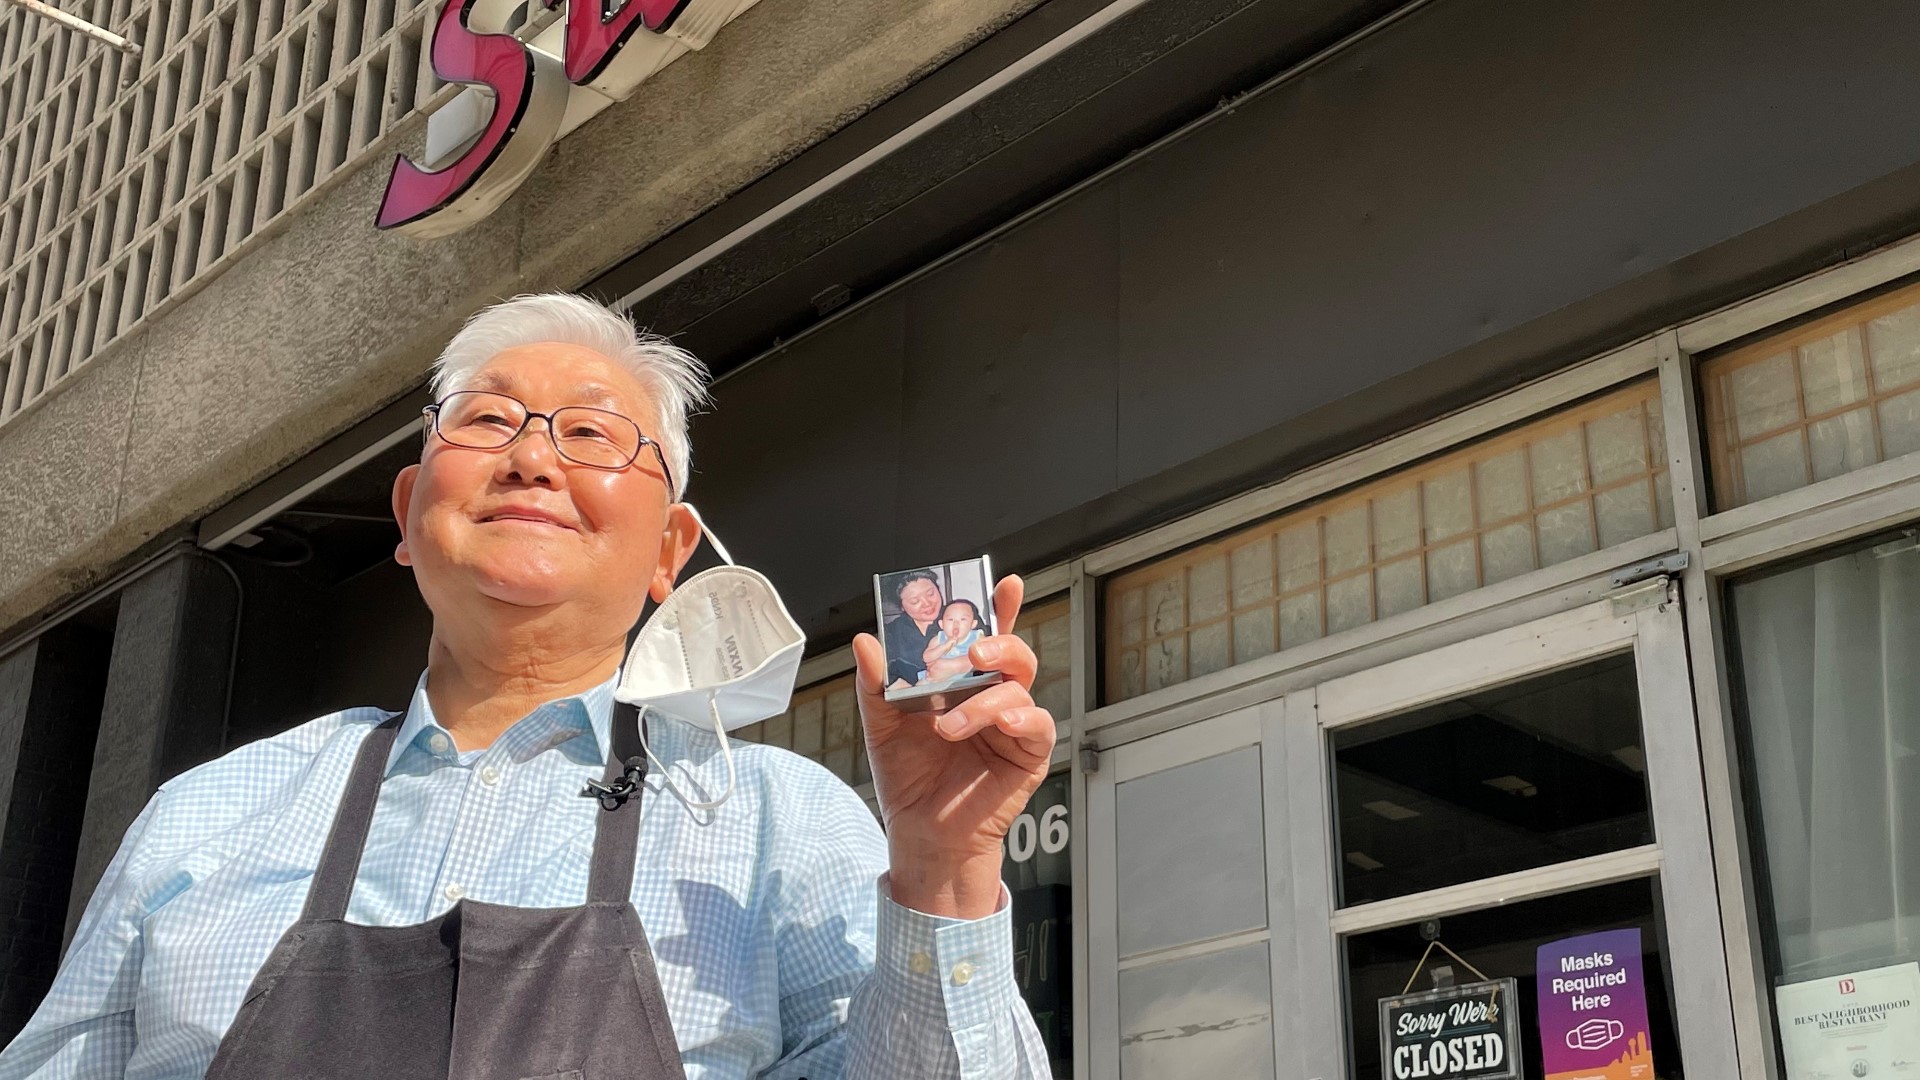 Kang Lee, 80, struggled to fill his downtown restaurant 'Sushiya' until his grandson posted a TikTok video encouraging hungry folks to visit.